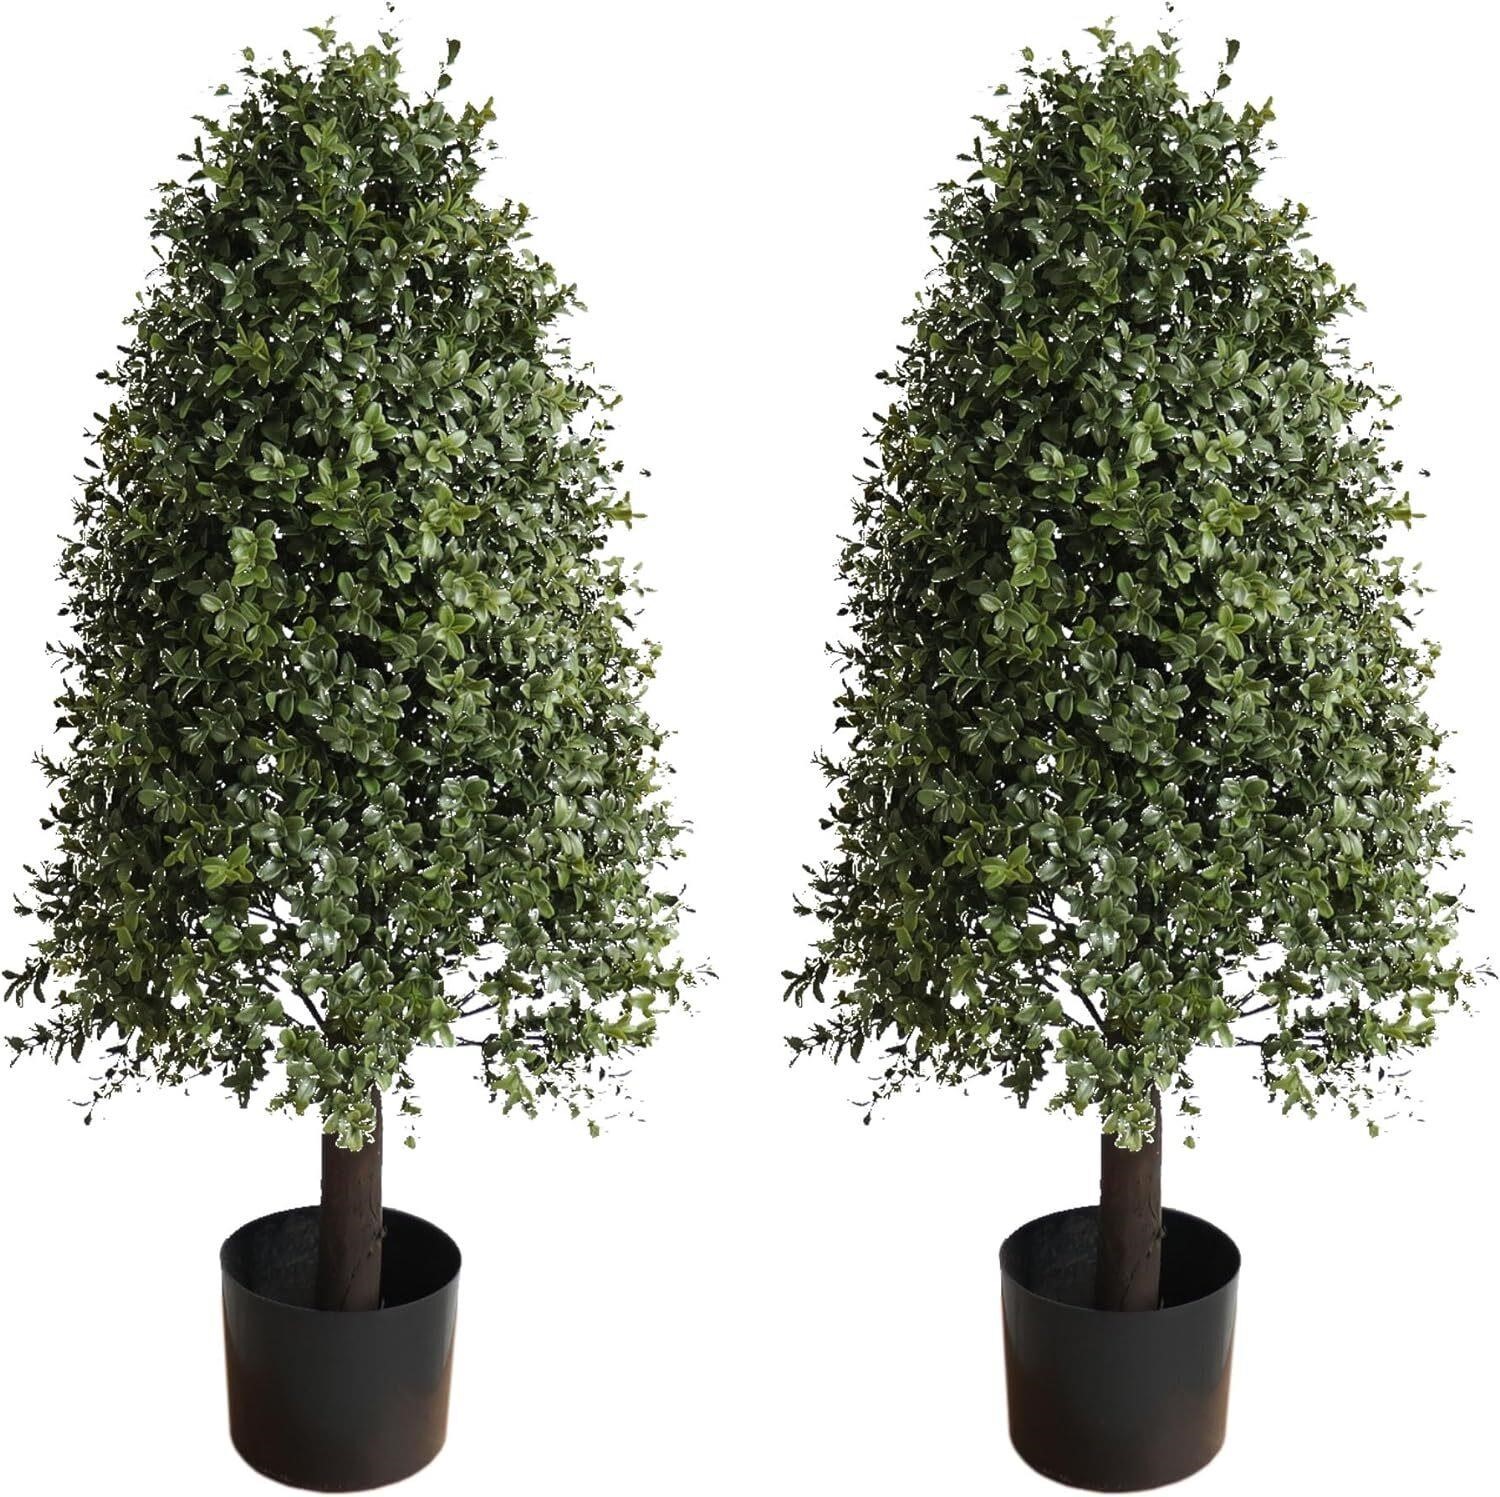 35 Artificial Outdoor Topiary Tree 2 Pack